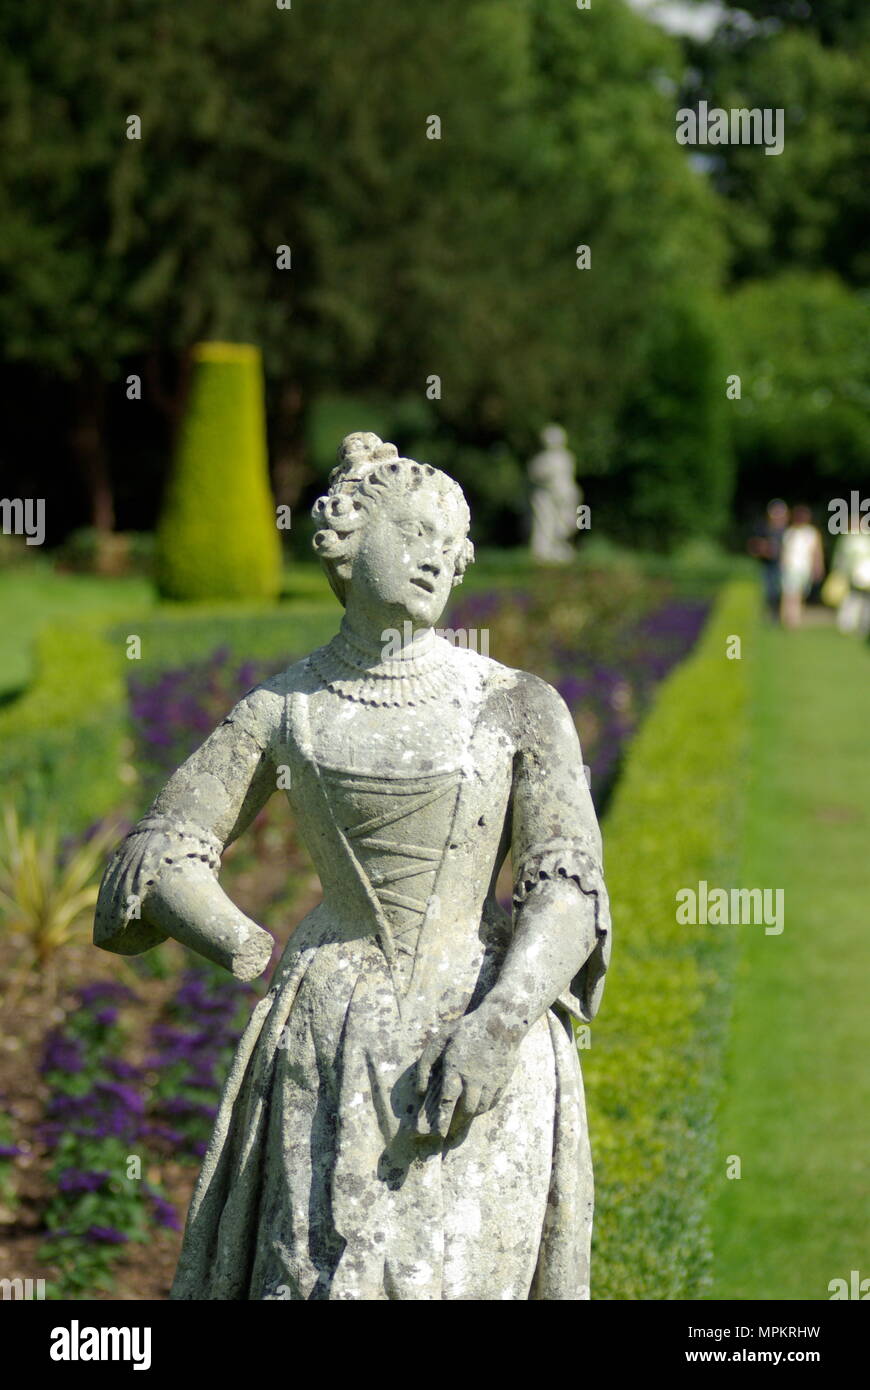 Stone statue of a woman in the garden of Cliveden House, Berkshire, England Stock Photo